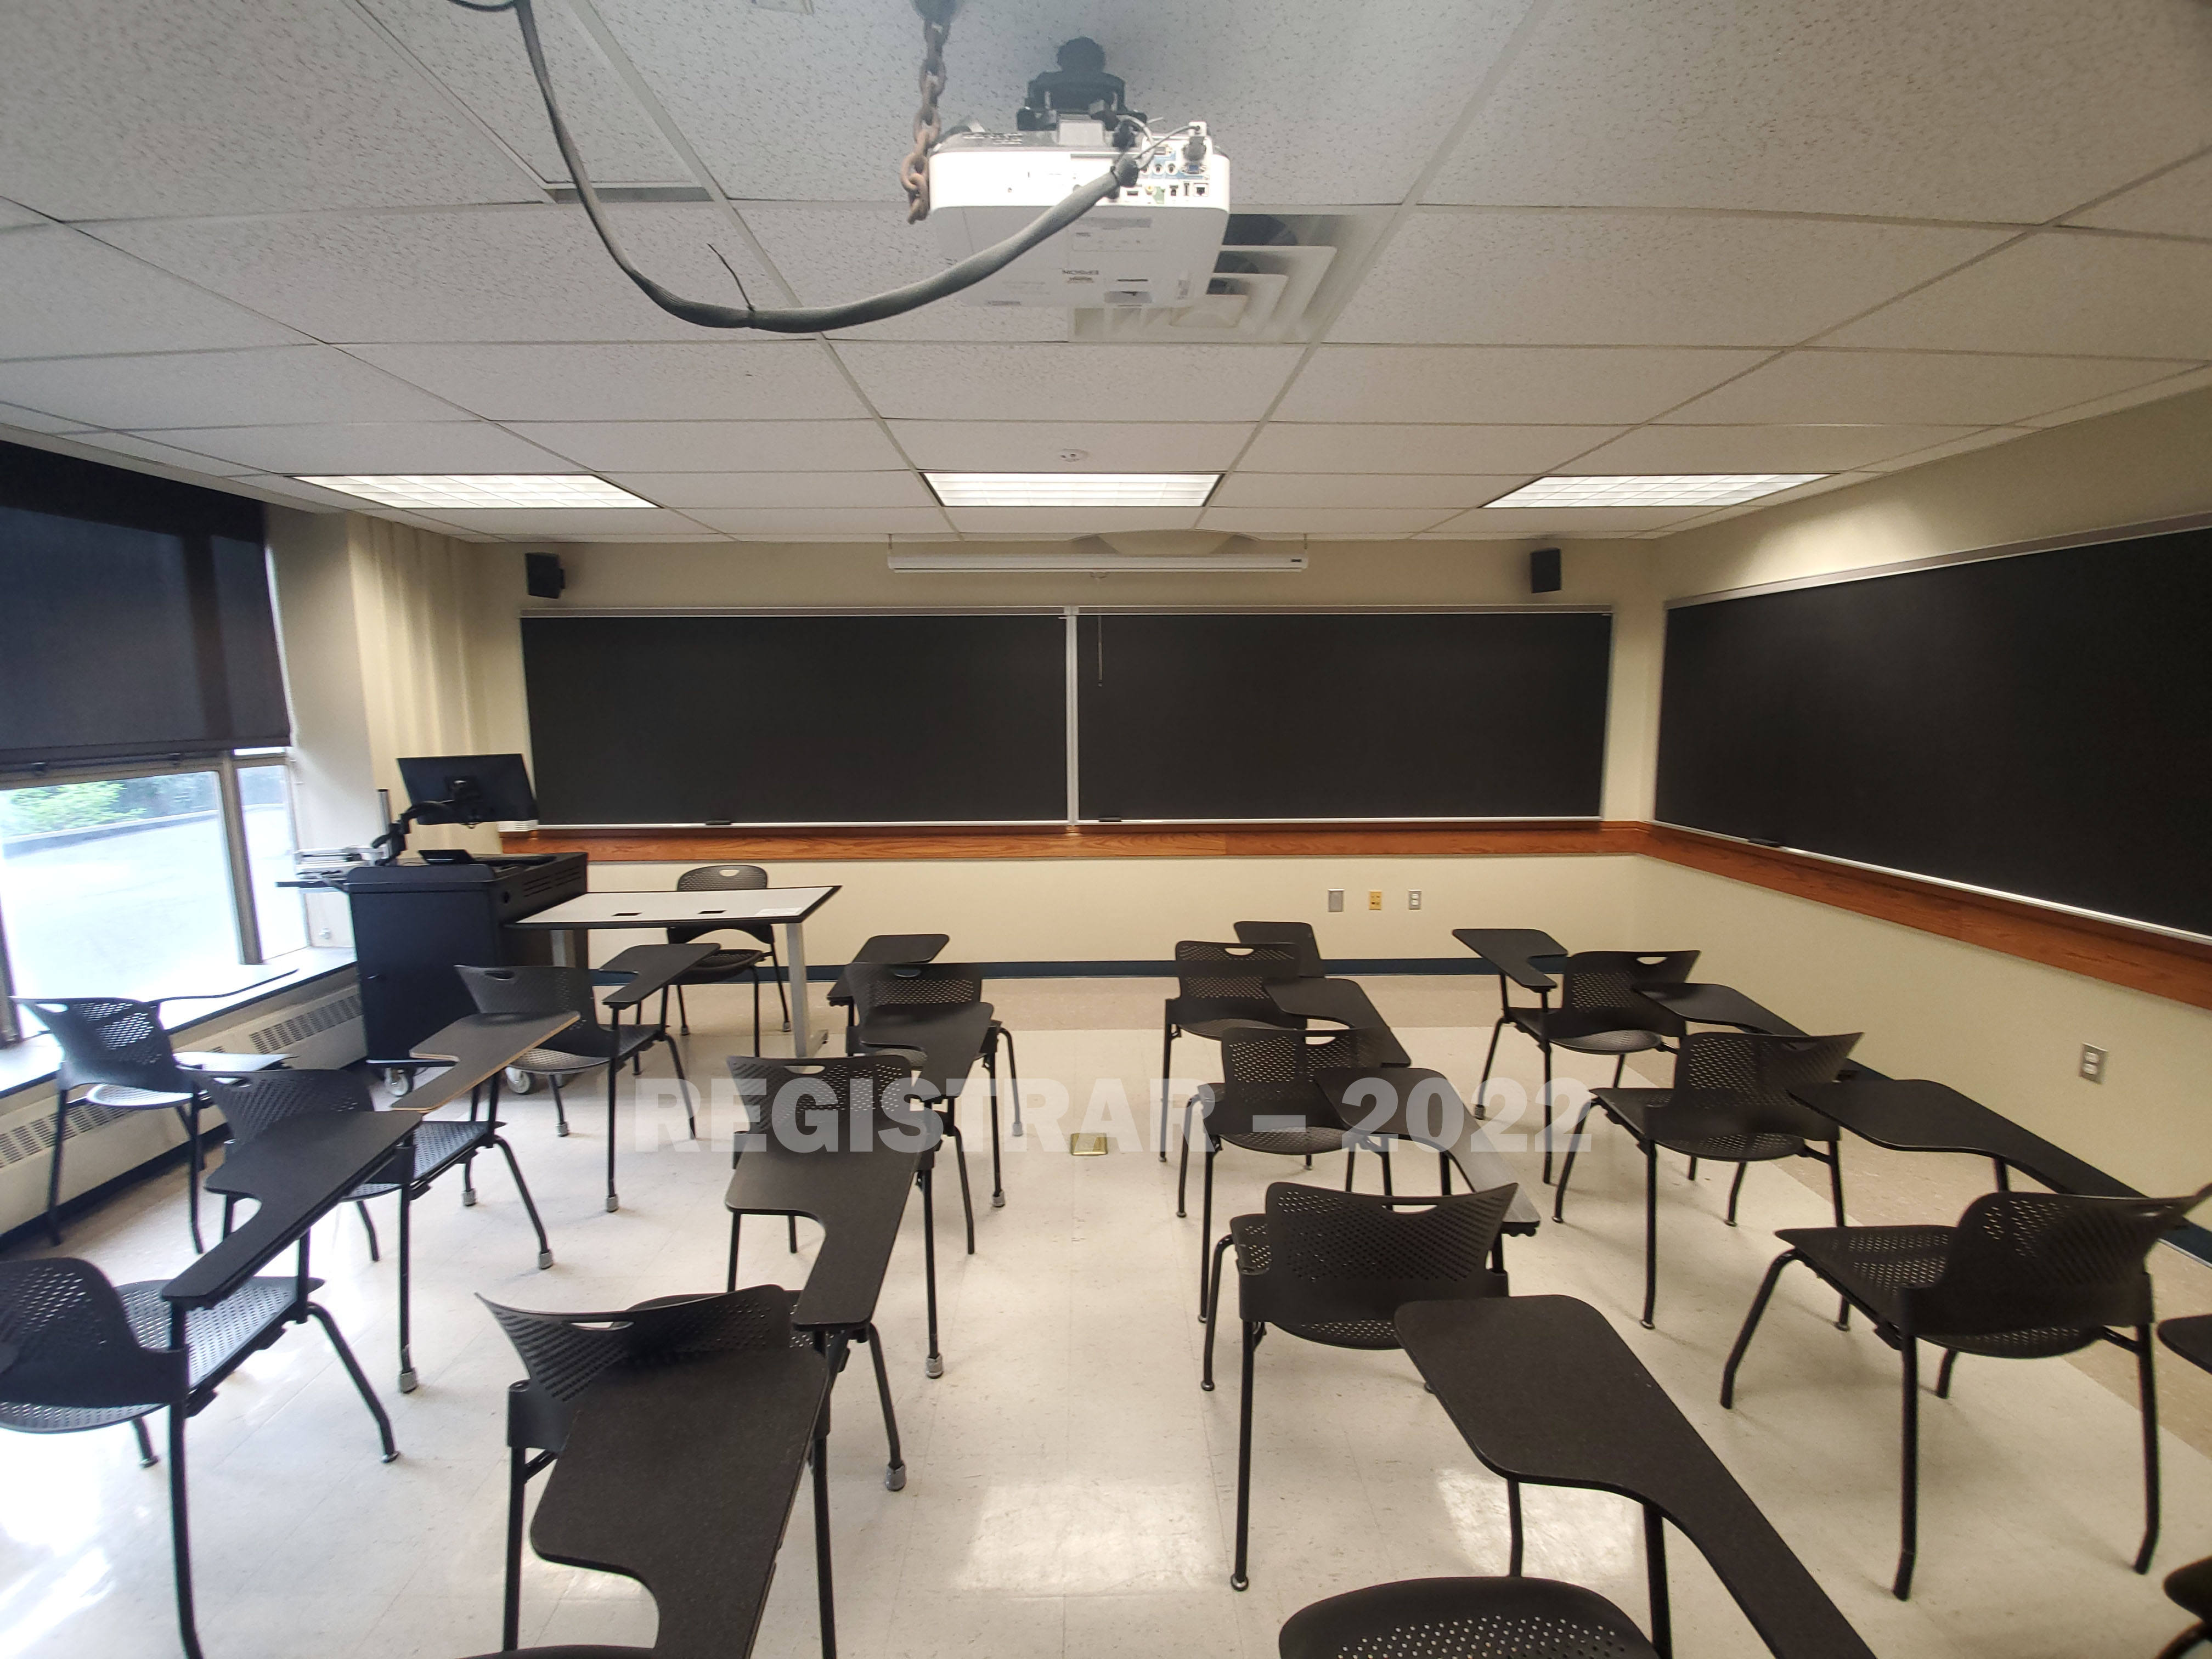 Enarson Classroom Building room 204 ultra wide angle view from the back of the room